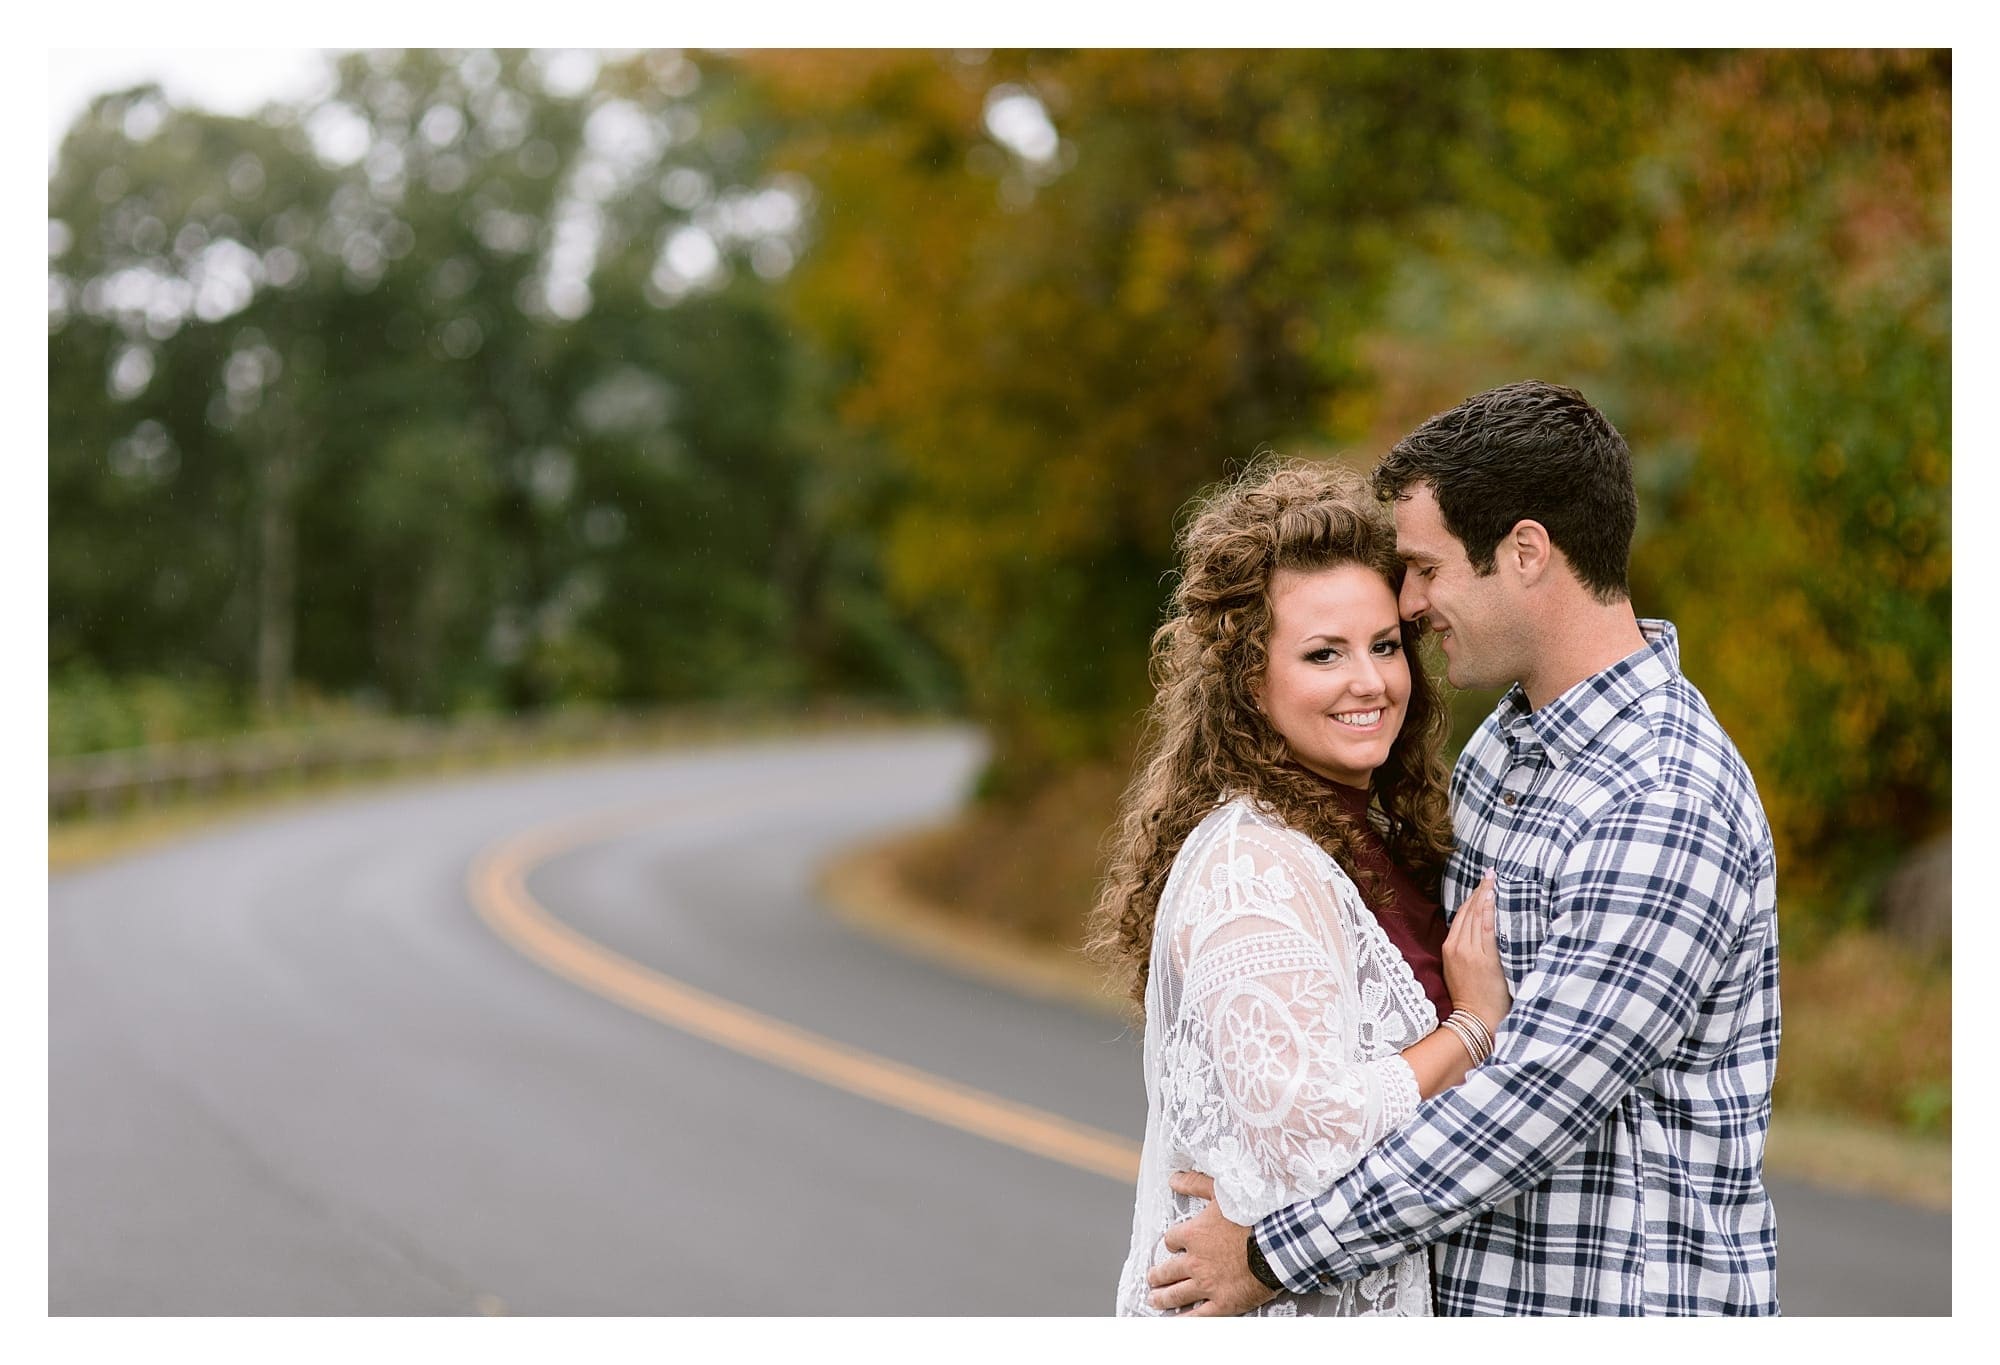 Engaged couple standing on road hugging one another and smiling with autumn trees behind them